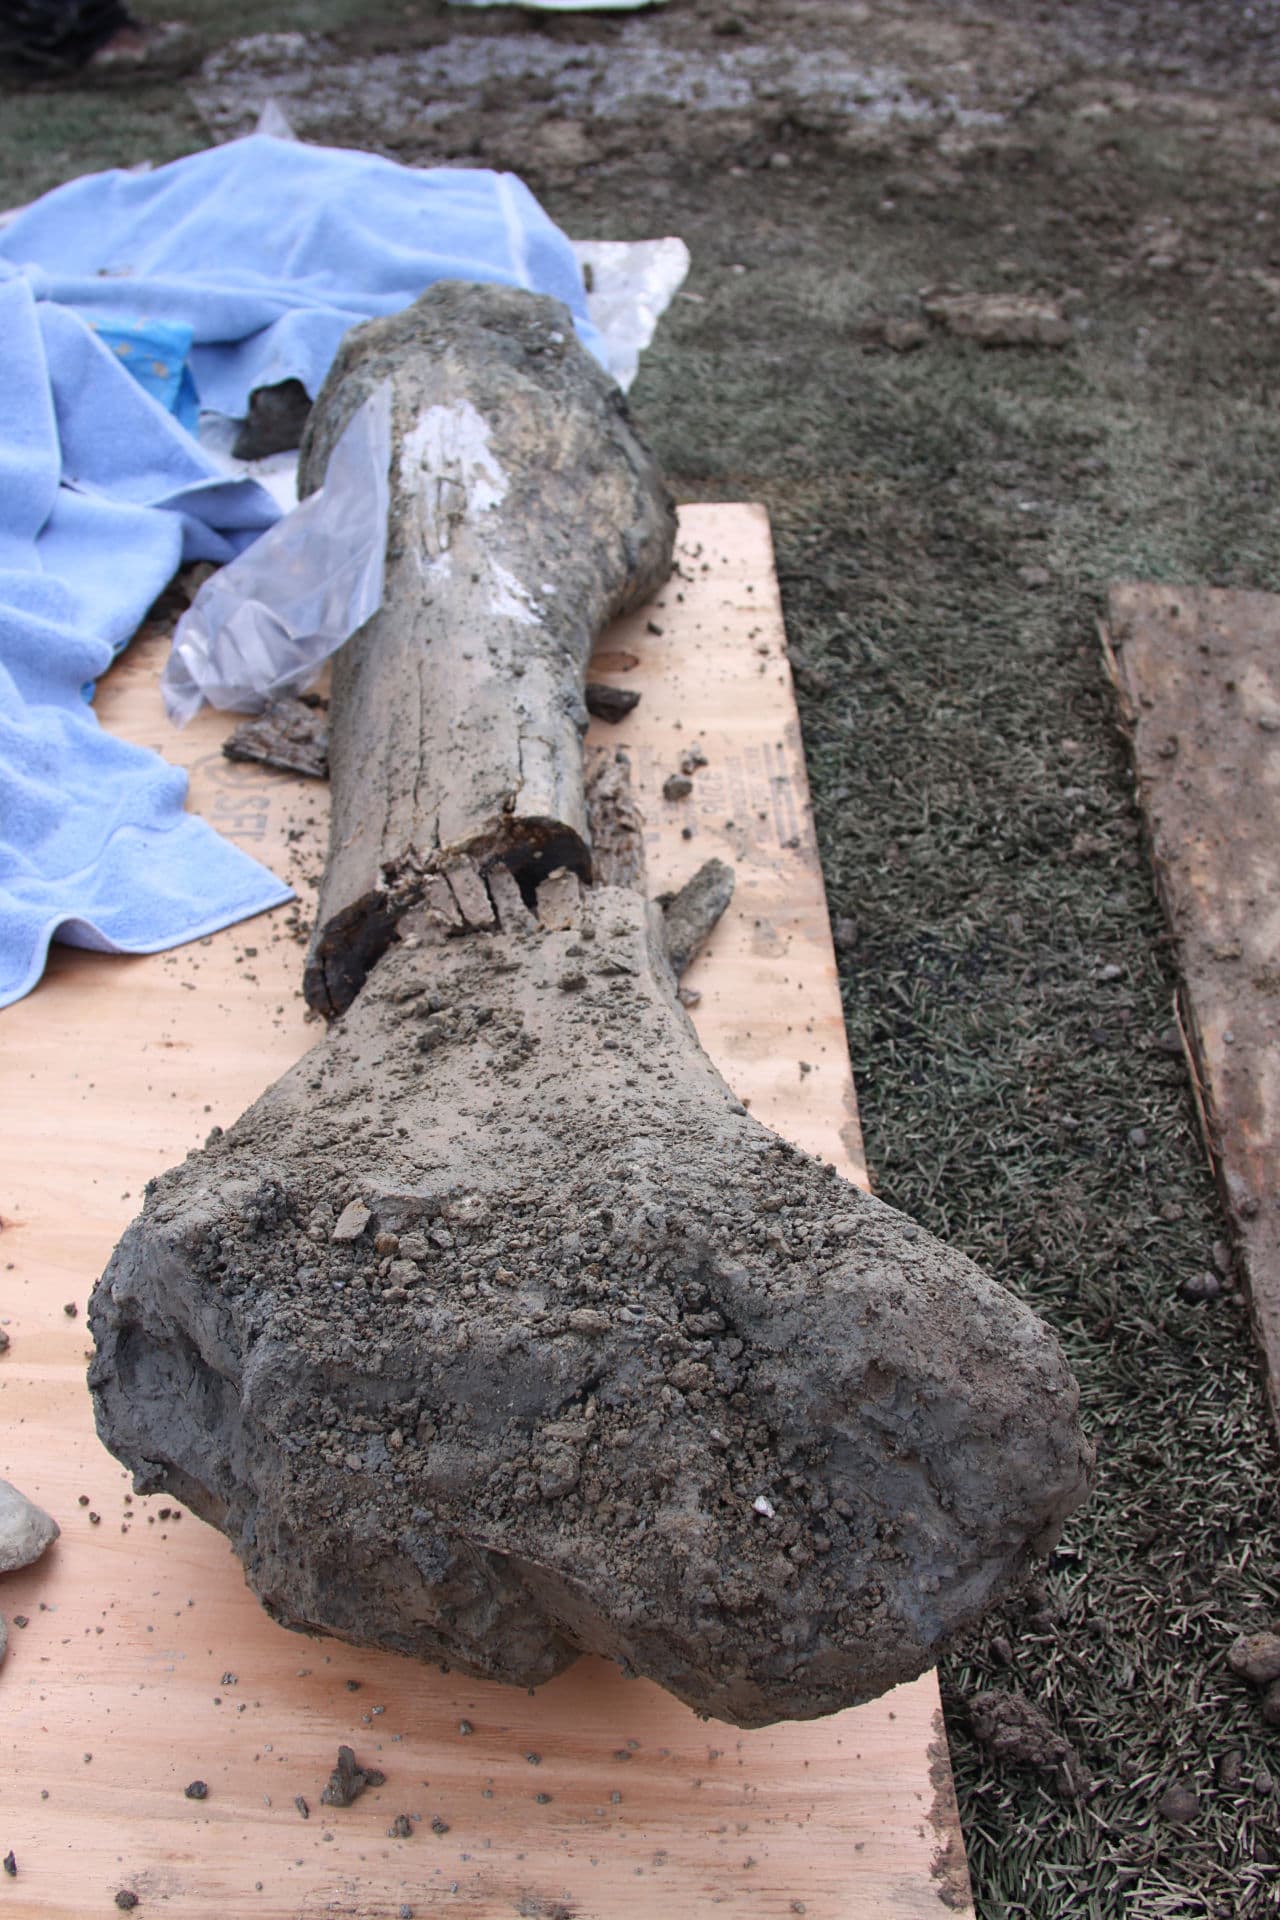 The femur of a mammoth found at an OSU construction site is pictured on Jan. 26, 2016. (Theresa Hogue)